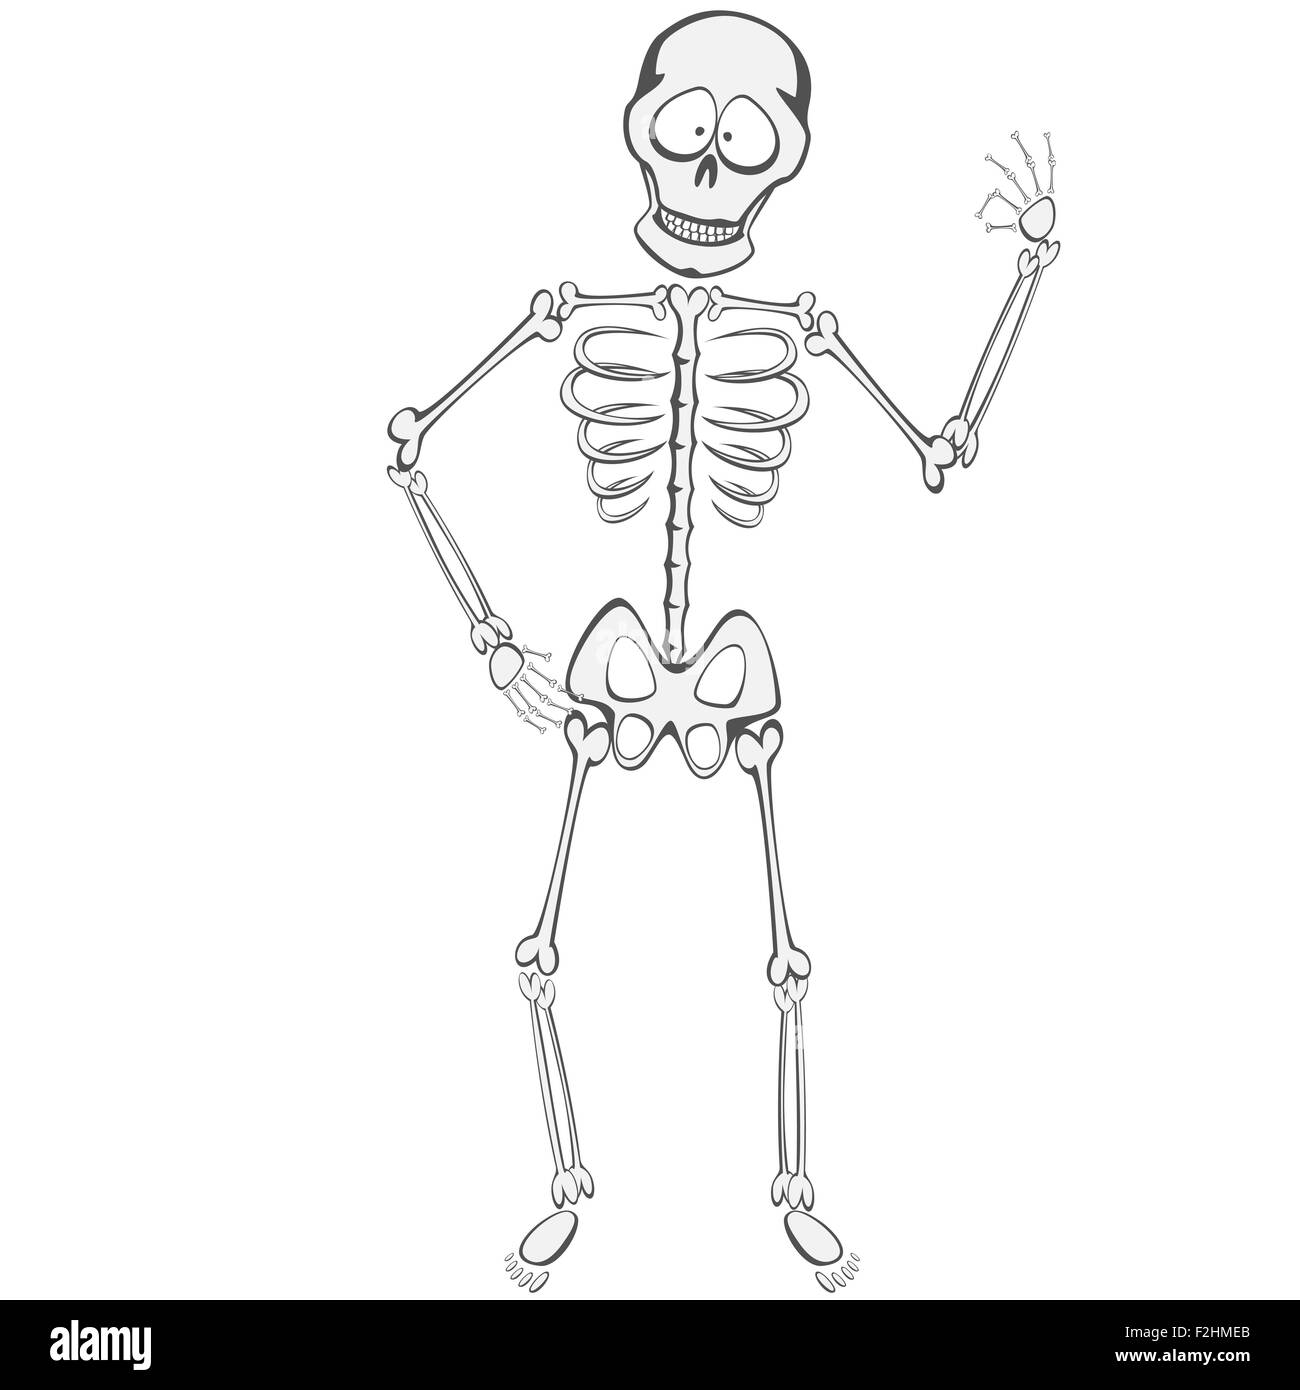 290 Funny Stick Man Drawings ideas  funny, funny pictures, bones funny